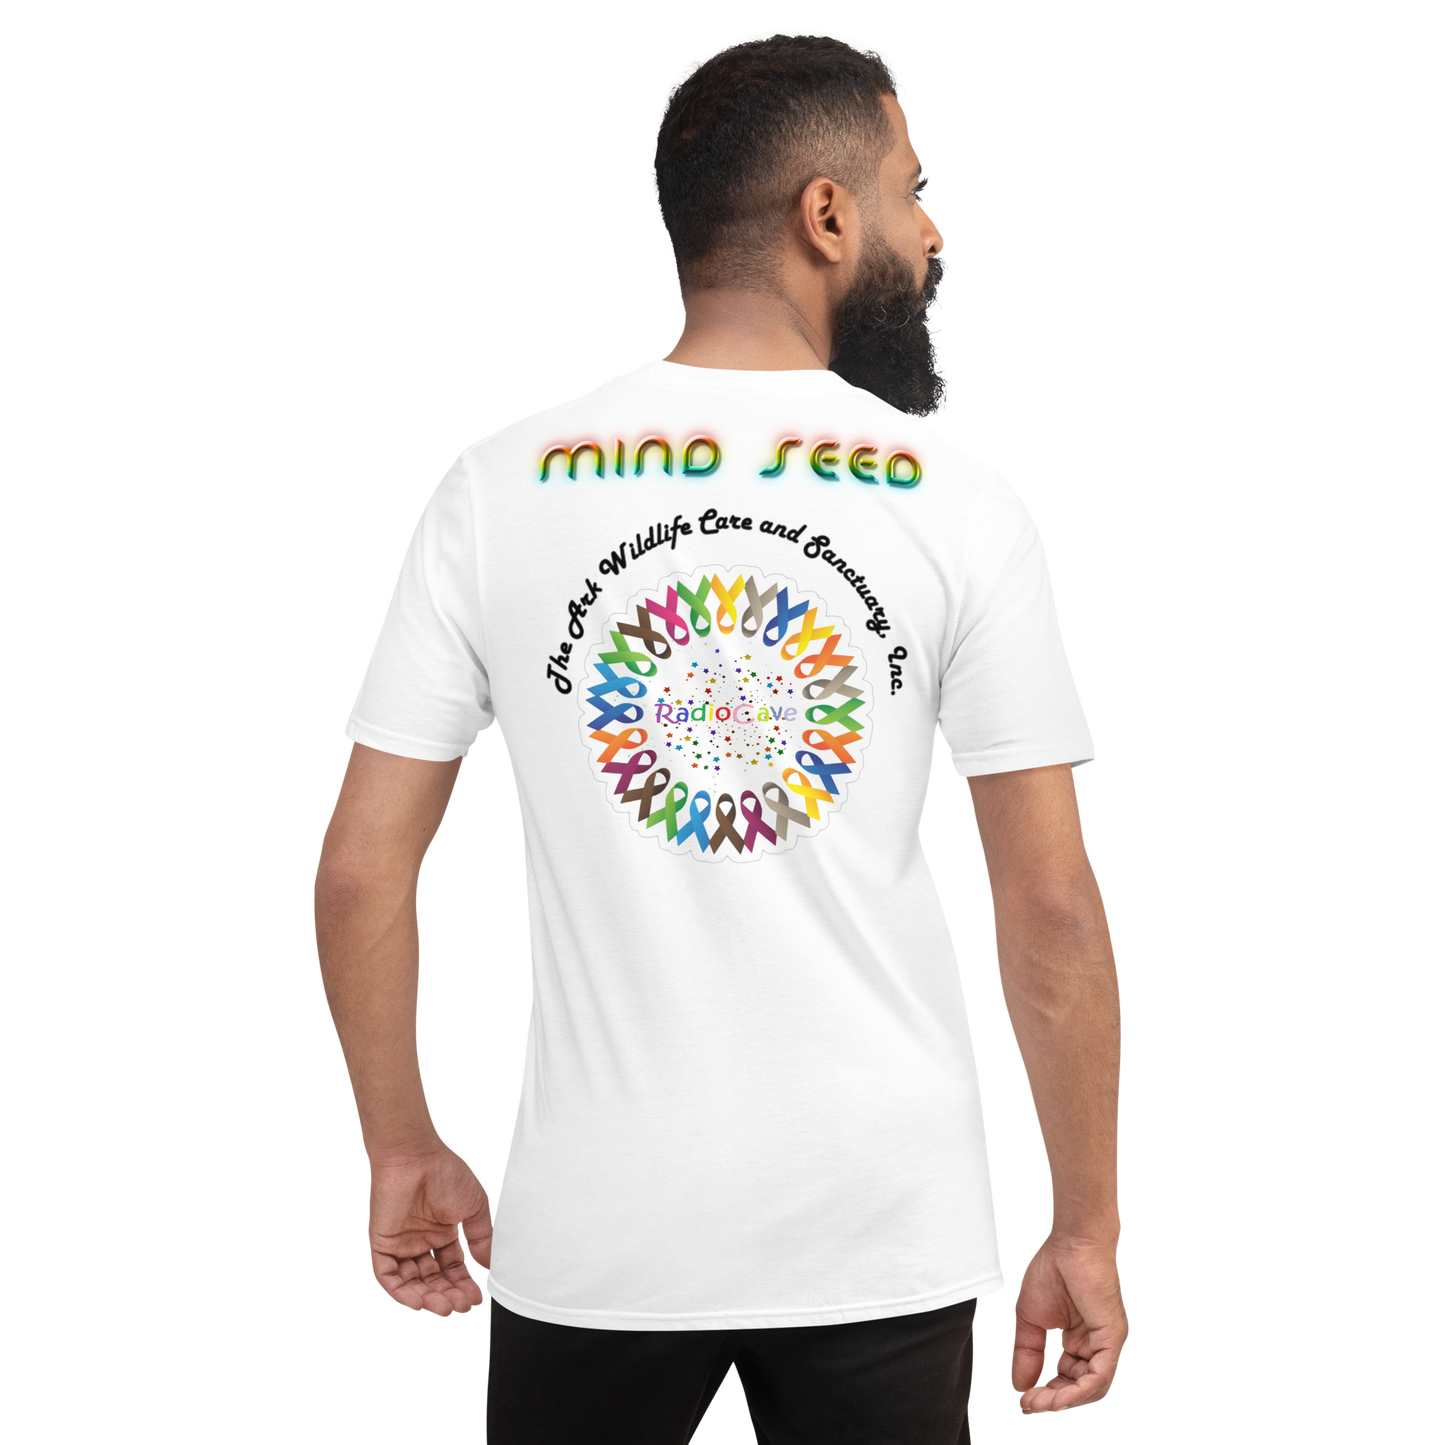 Earthdance 2023 - Mind Seed v1 - Limited Edition - Short-Sleeve T-Shirt - The Foundation of Families